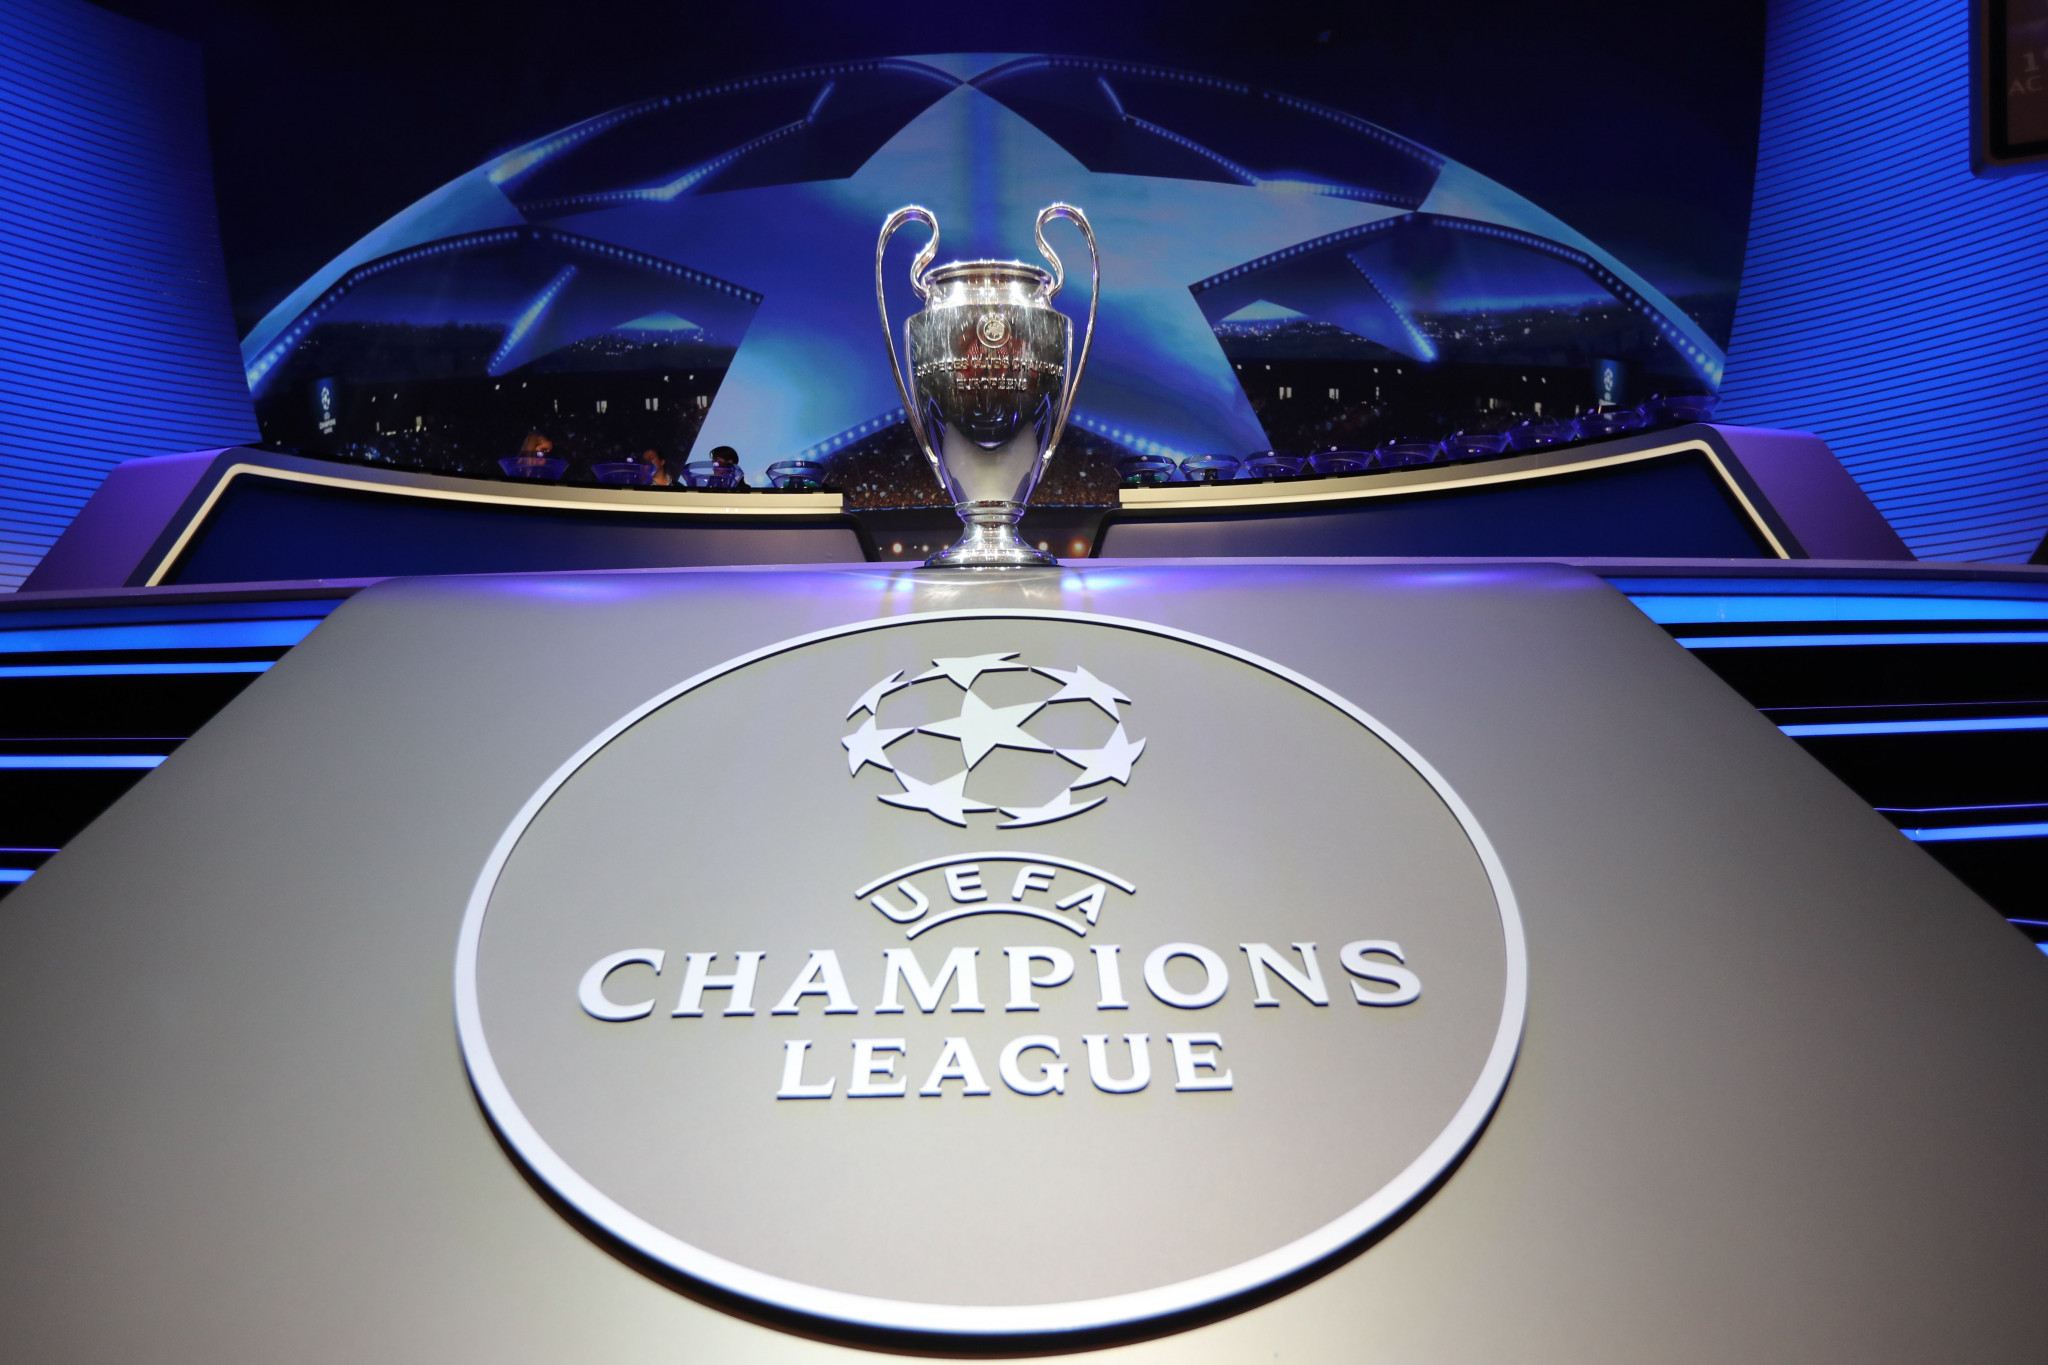 UEFA has established the Champions League as one of the most recognisable products in world sport ©Getty Images